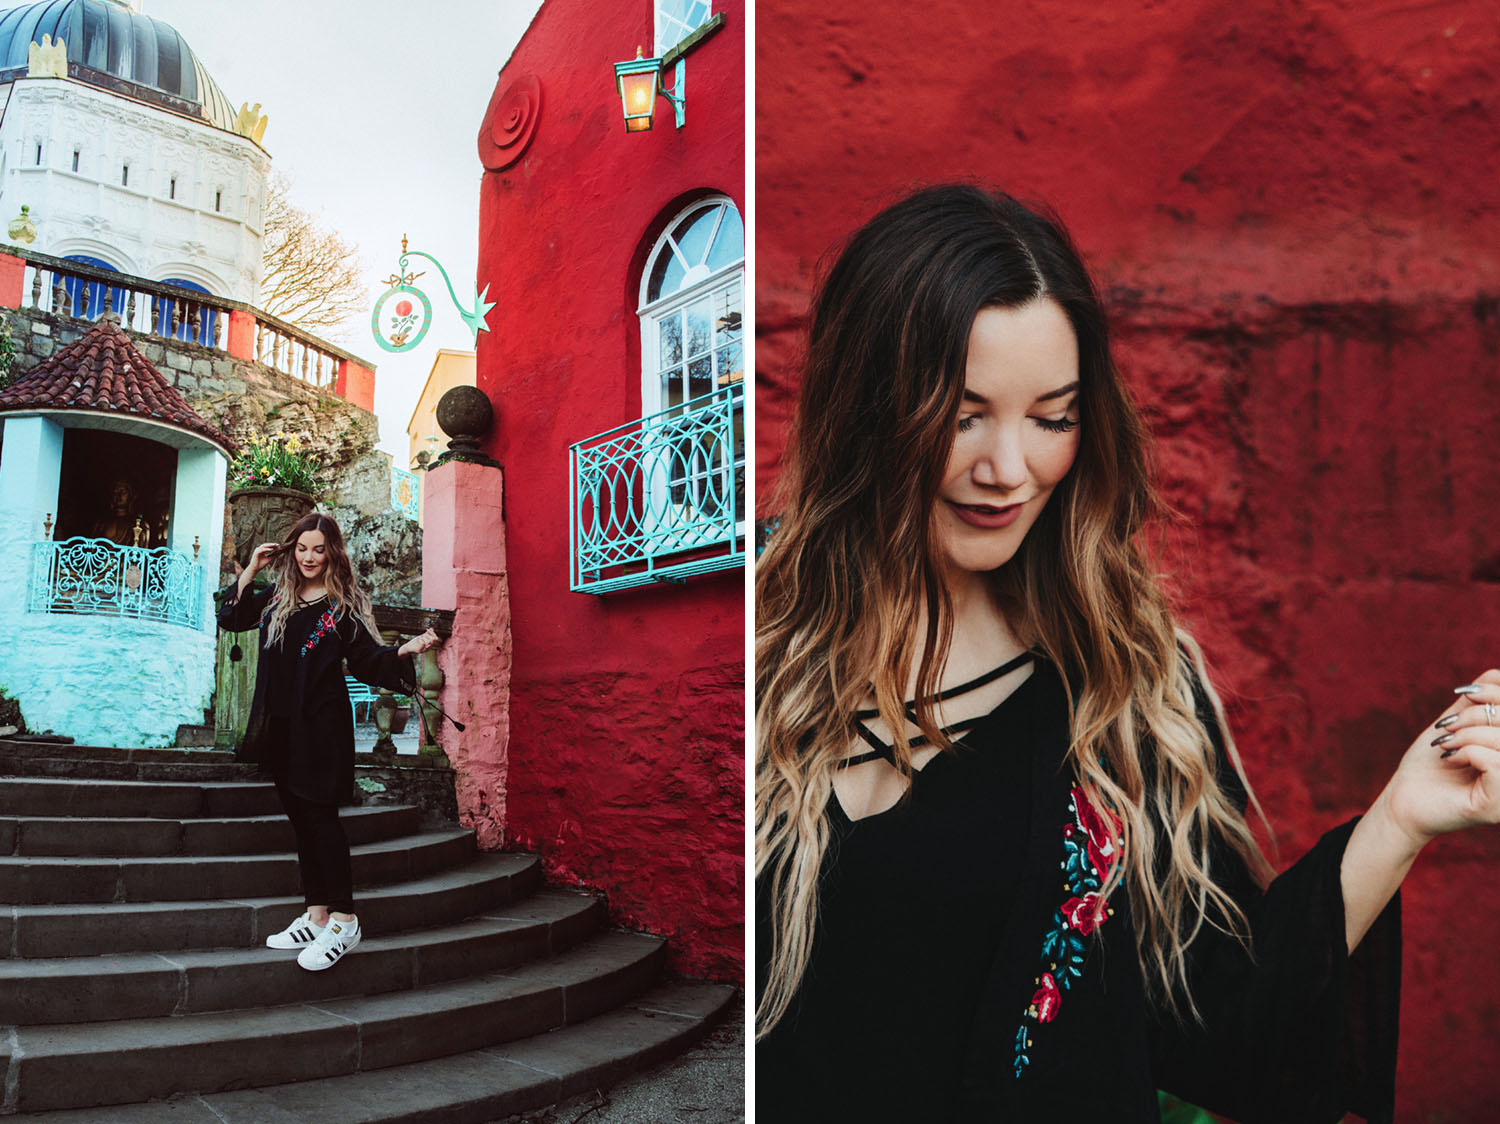 Portraits against a red building in Portmeirion